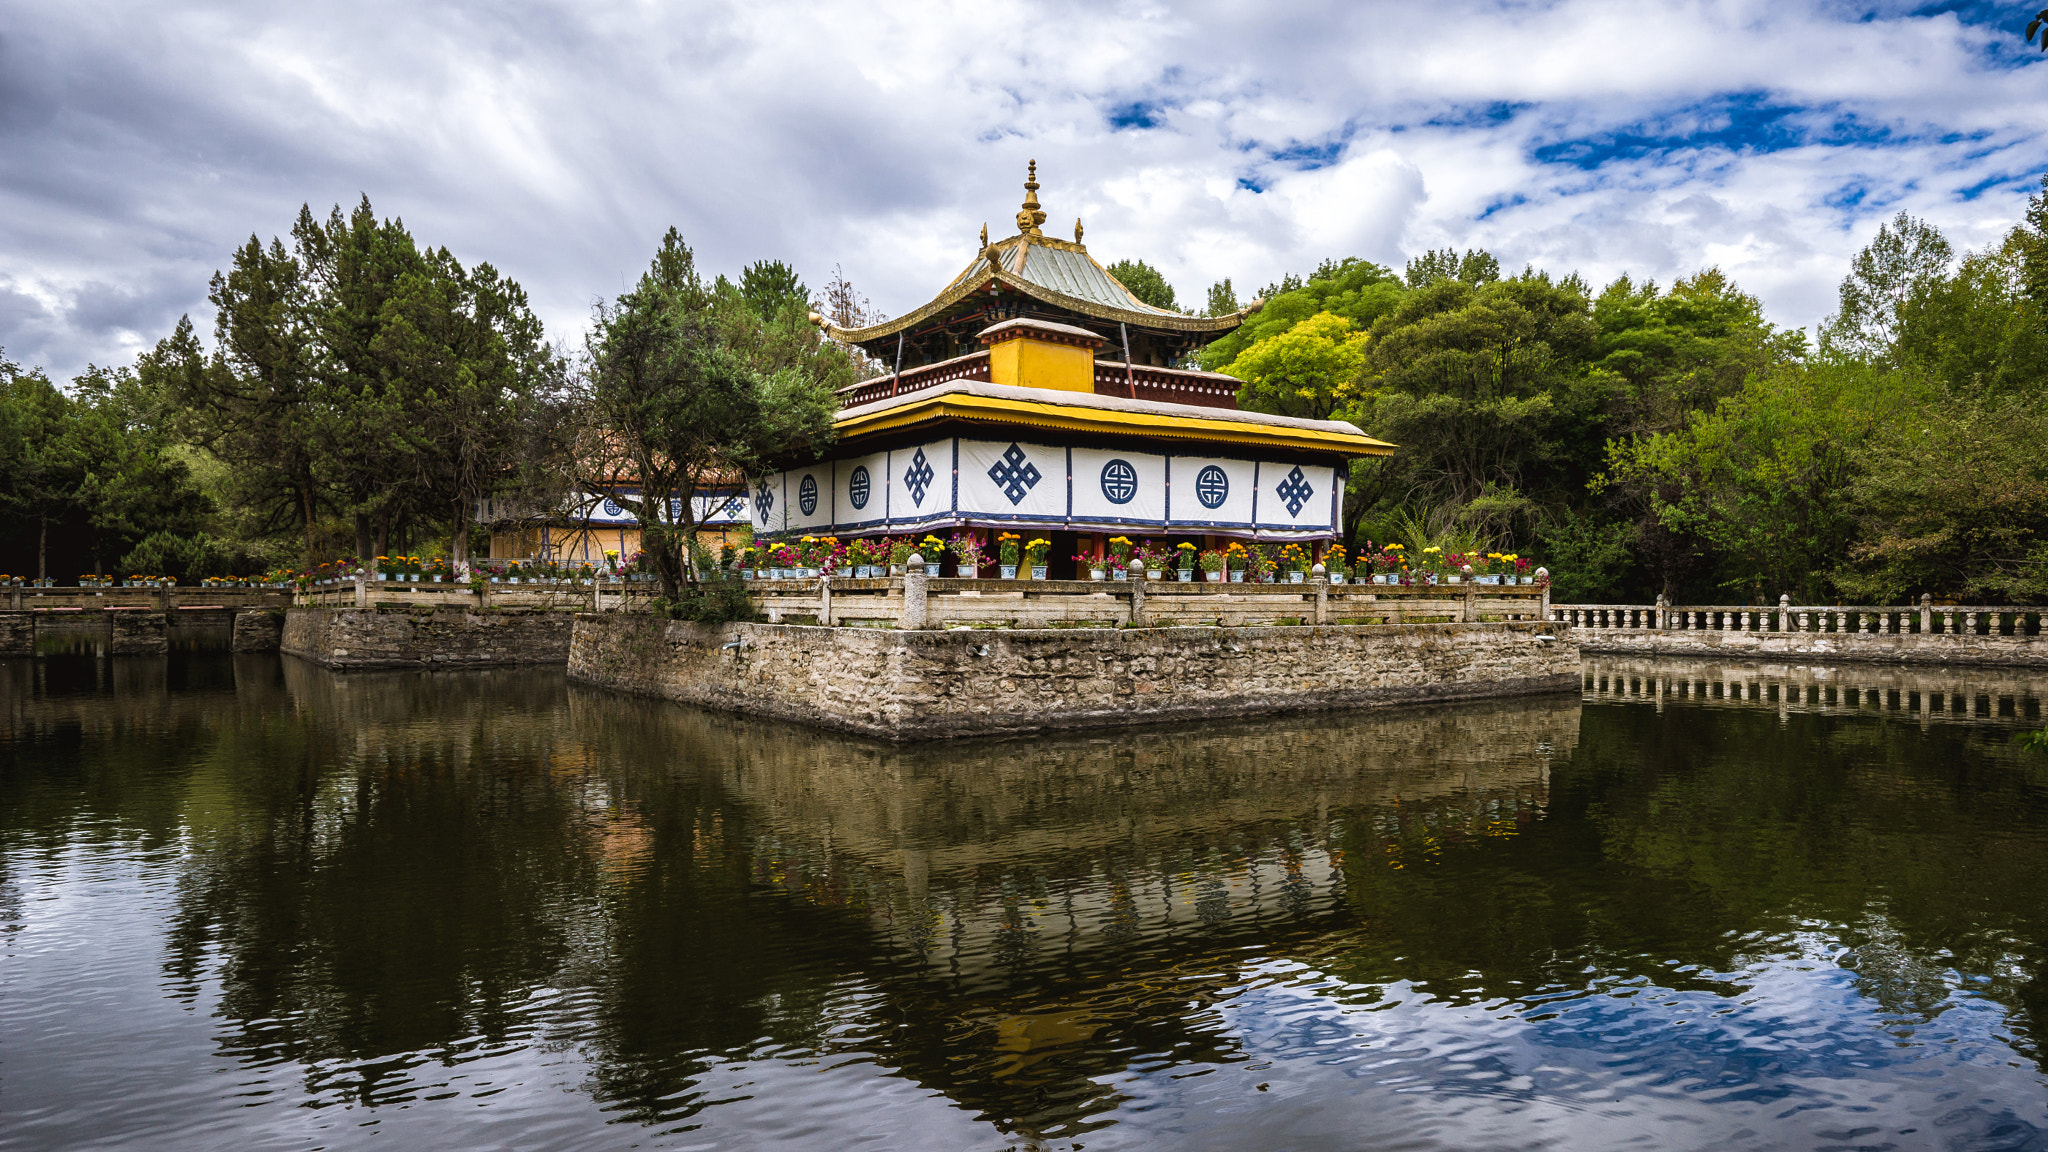 Sony a99 II sample photo. Norbulingka park in lhasa, tibet photography